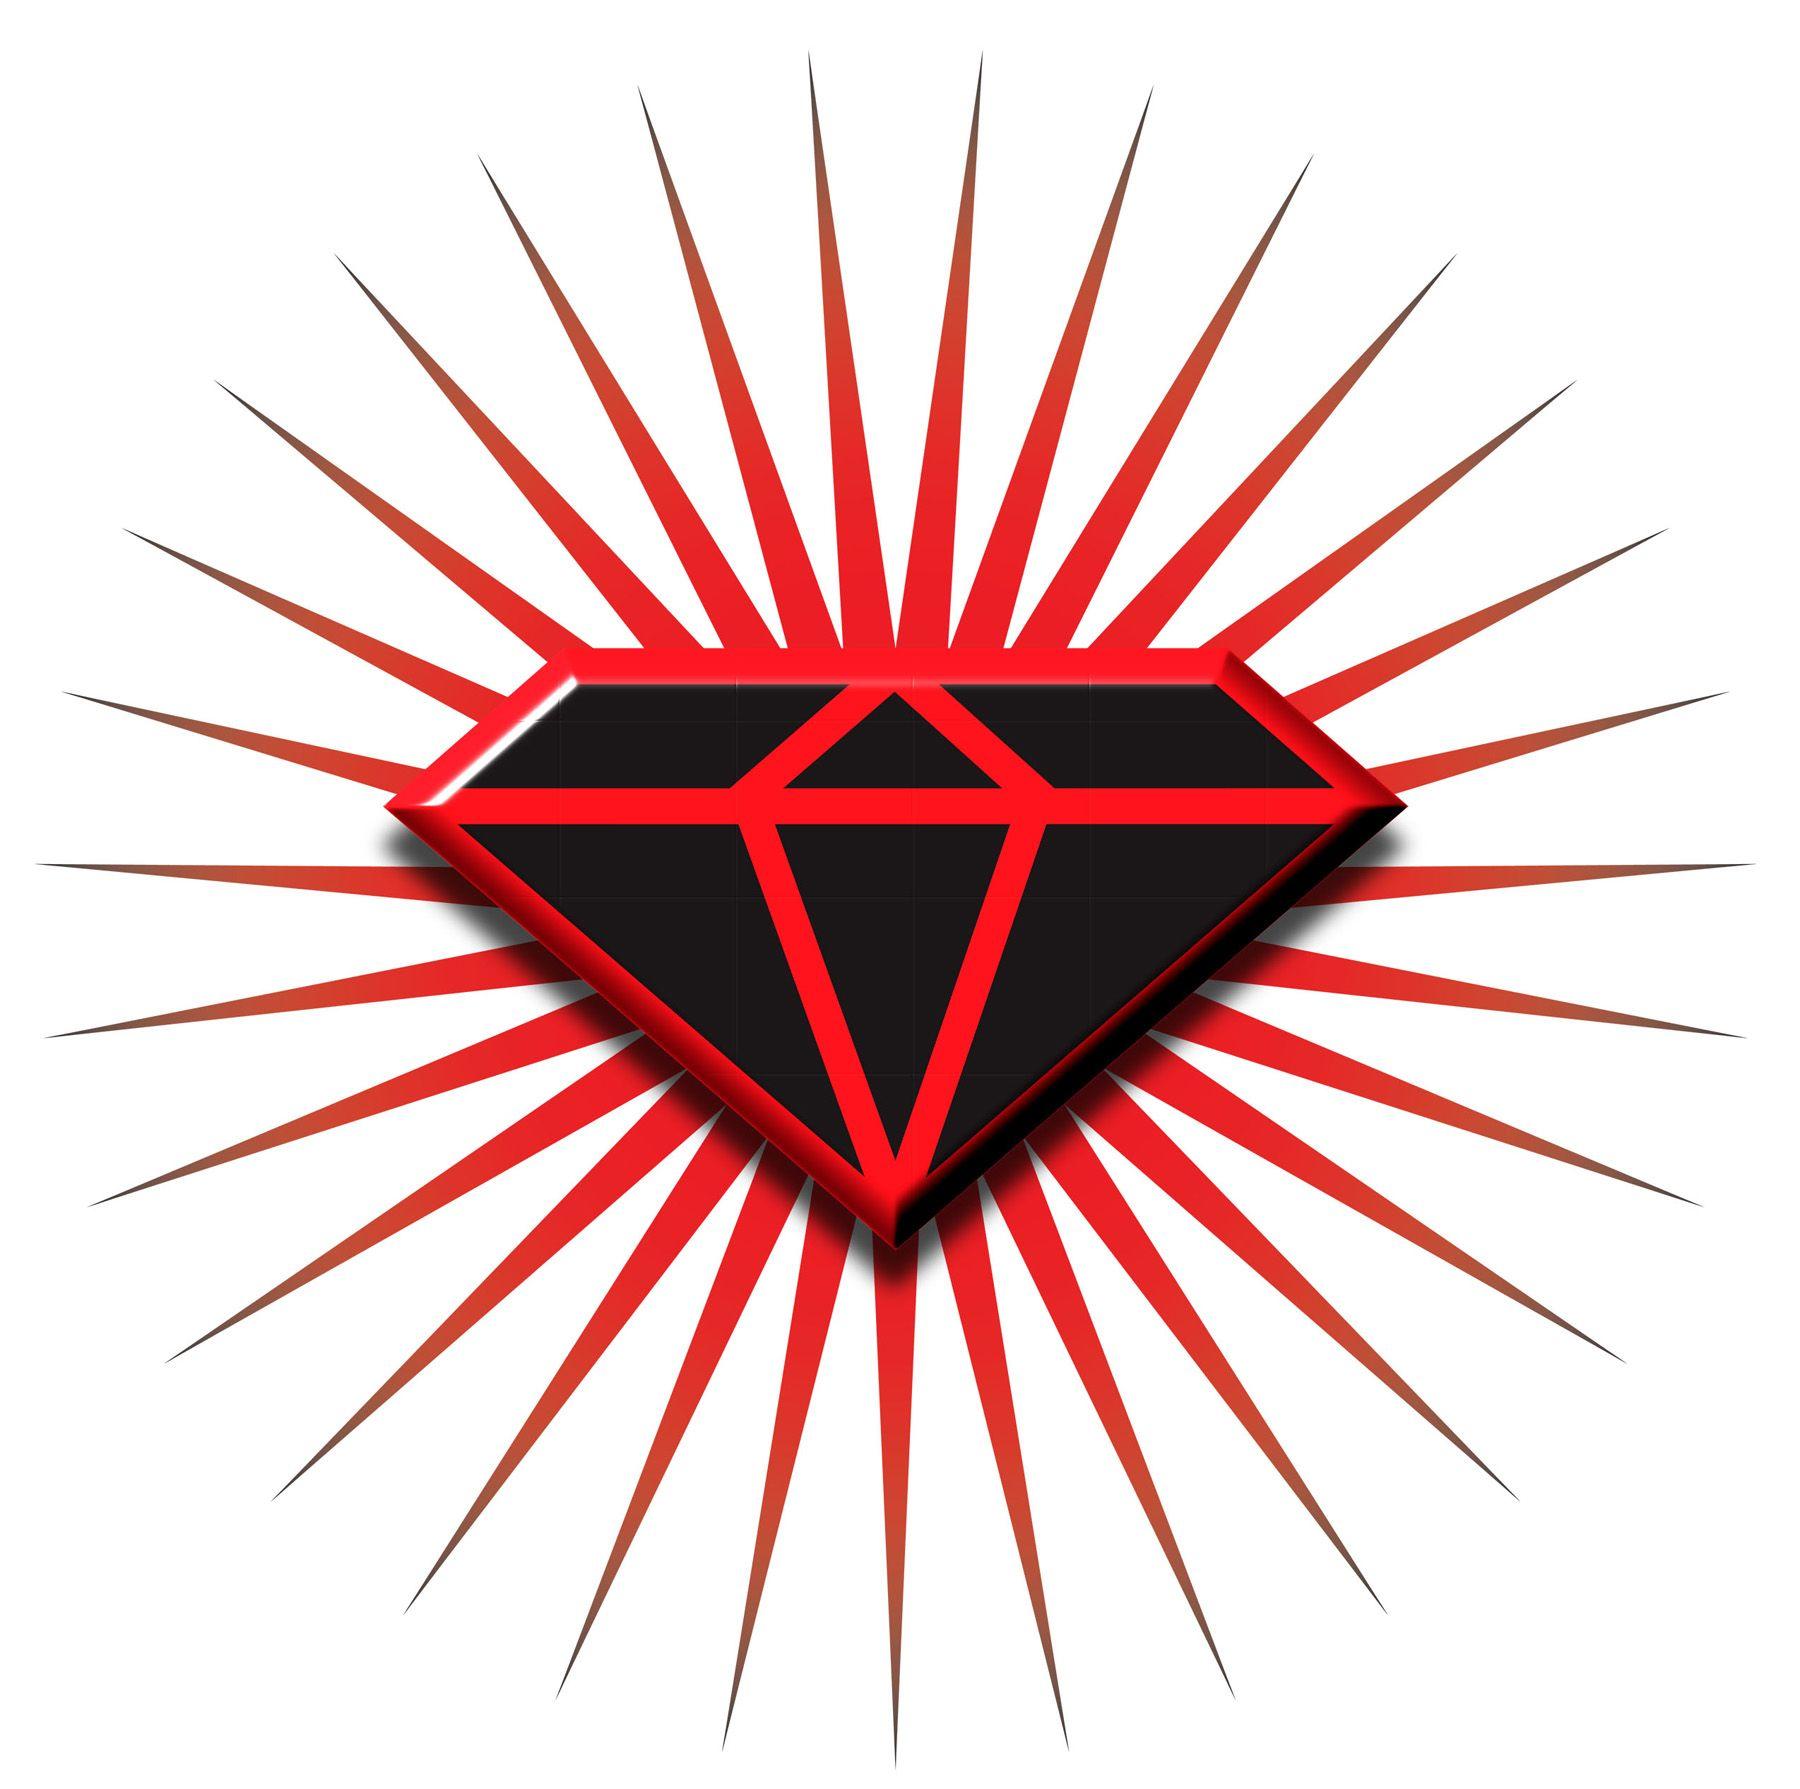 Black and Red Diamond Logo - STI Tire & Wheel Product and Promotion Logos